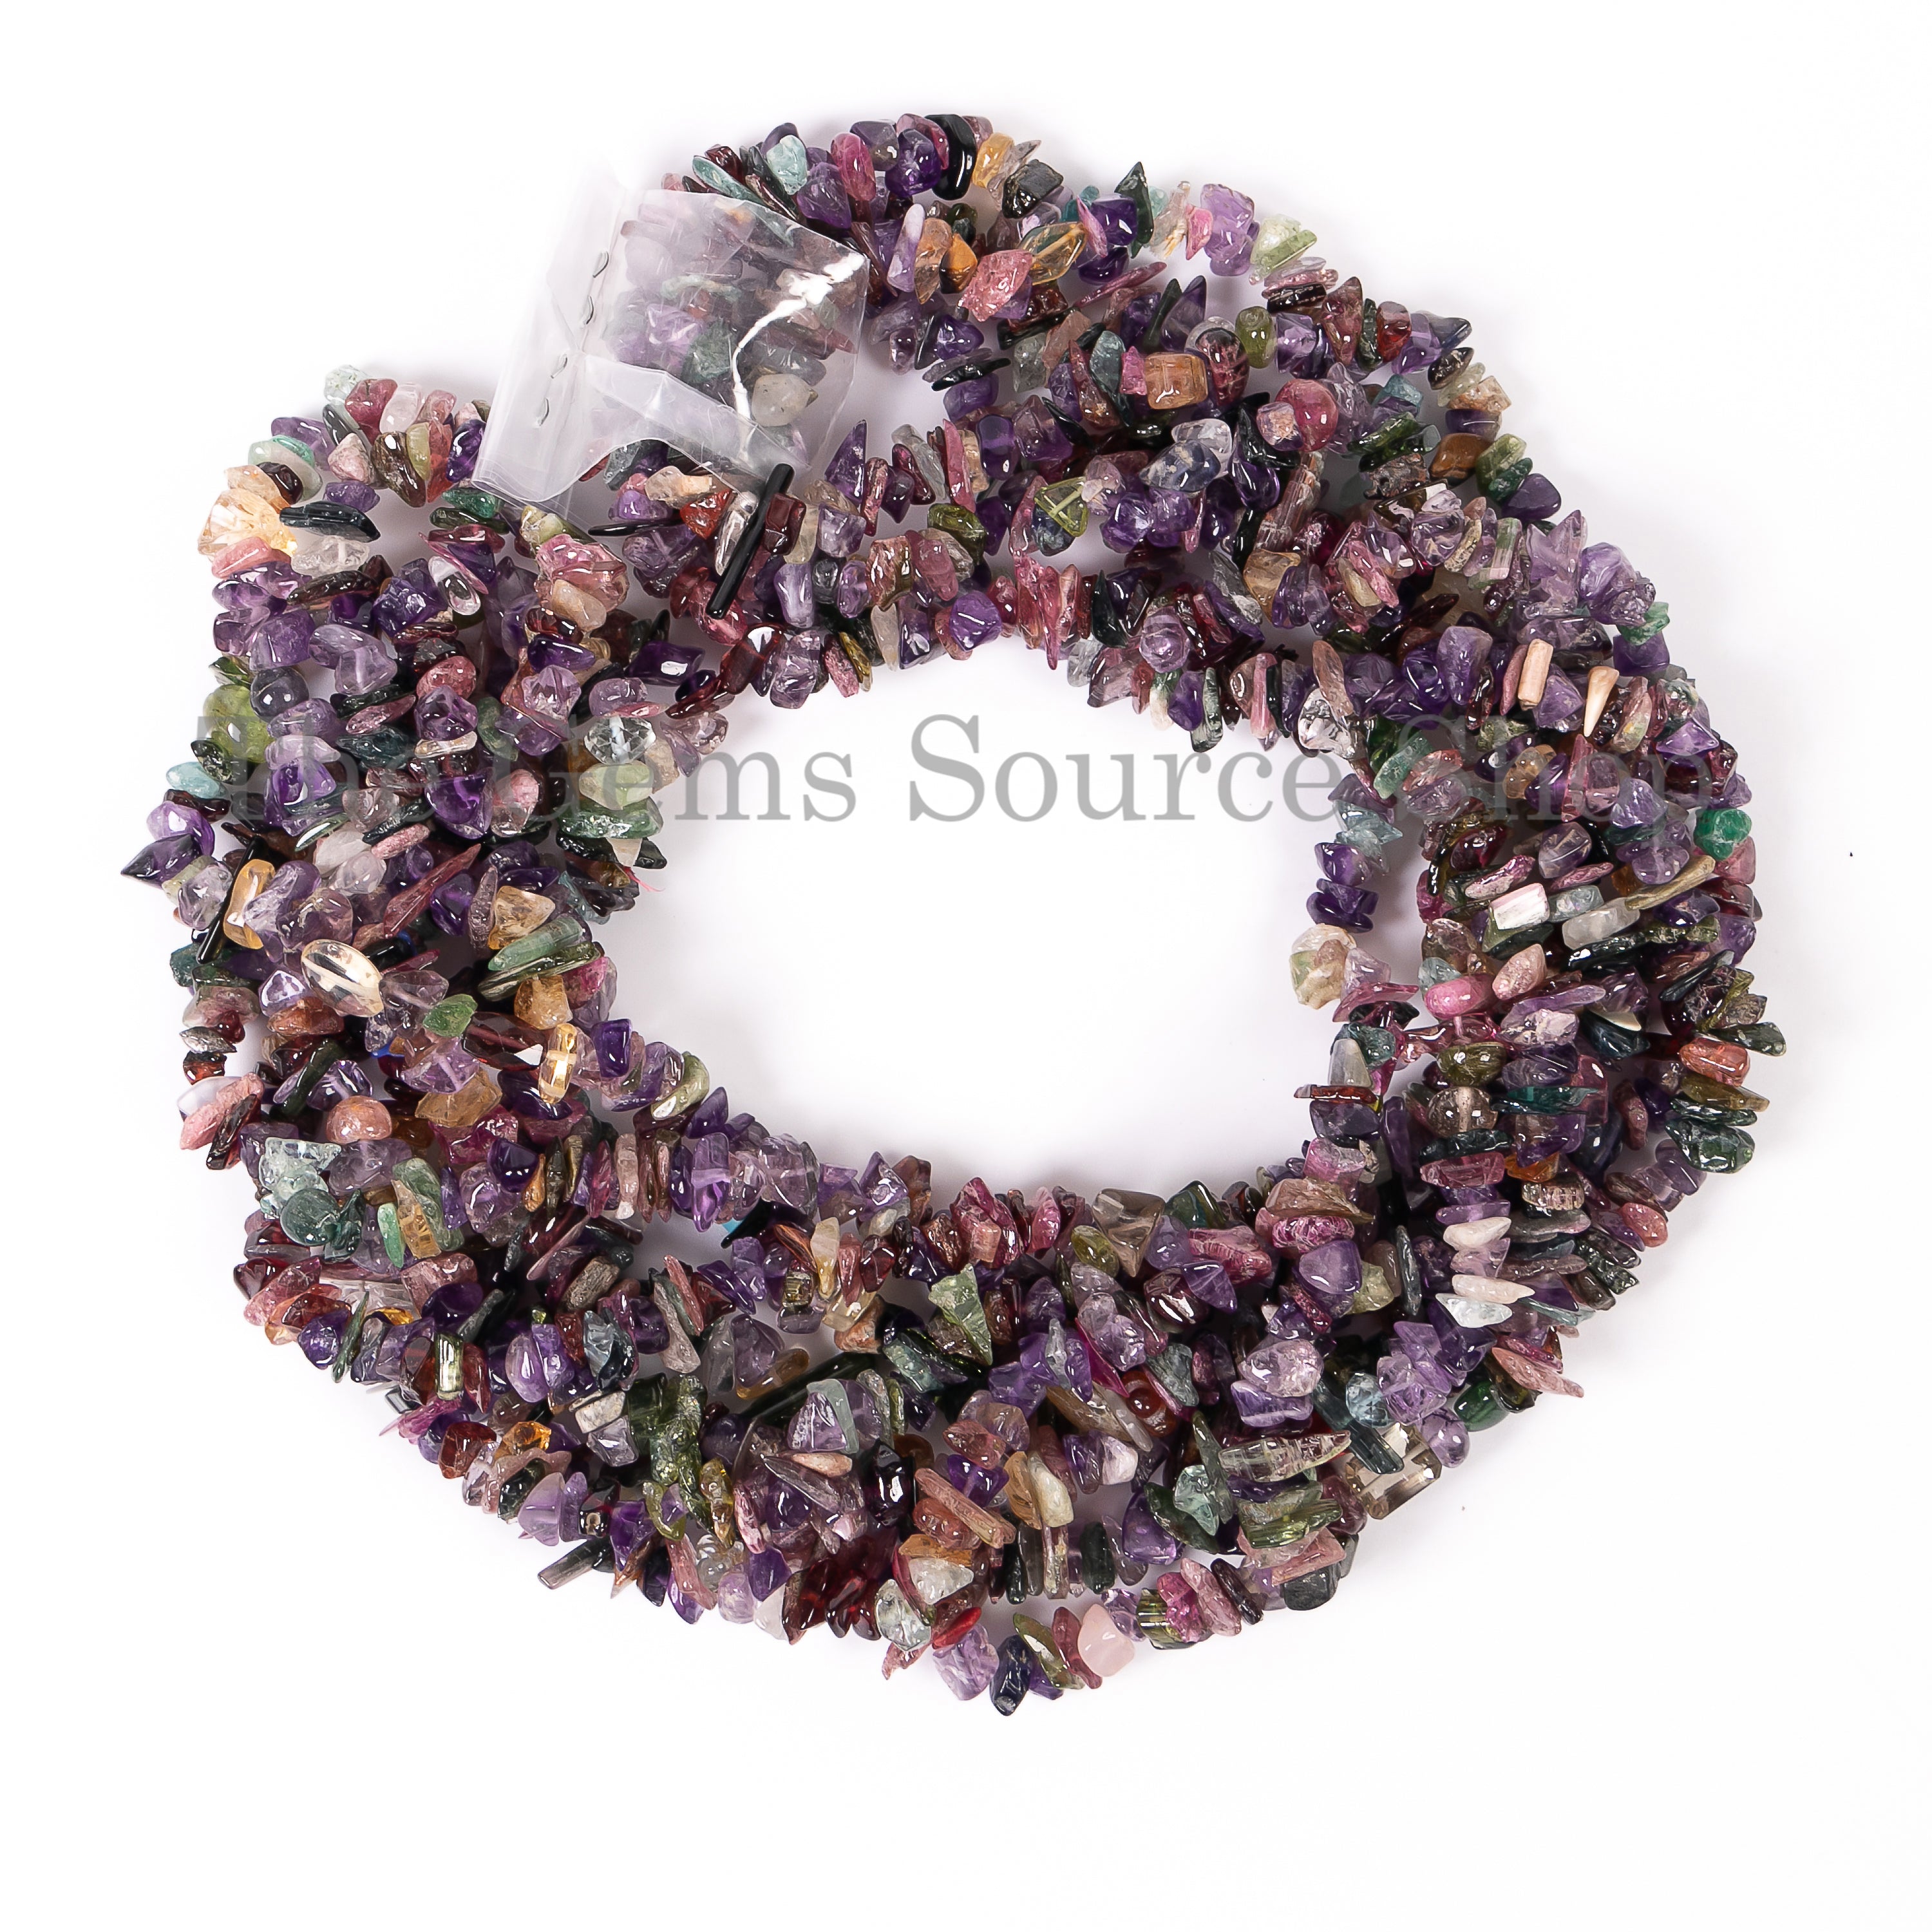 Multi Gemstone Smooth Chips Nuggets Beads For Jewelry Making TGS-4694